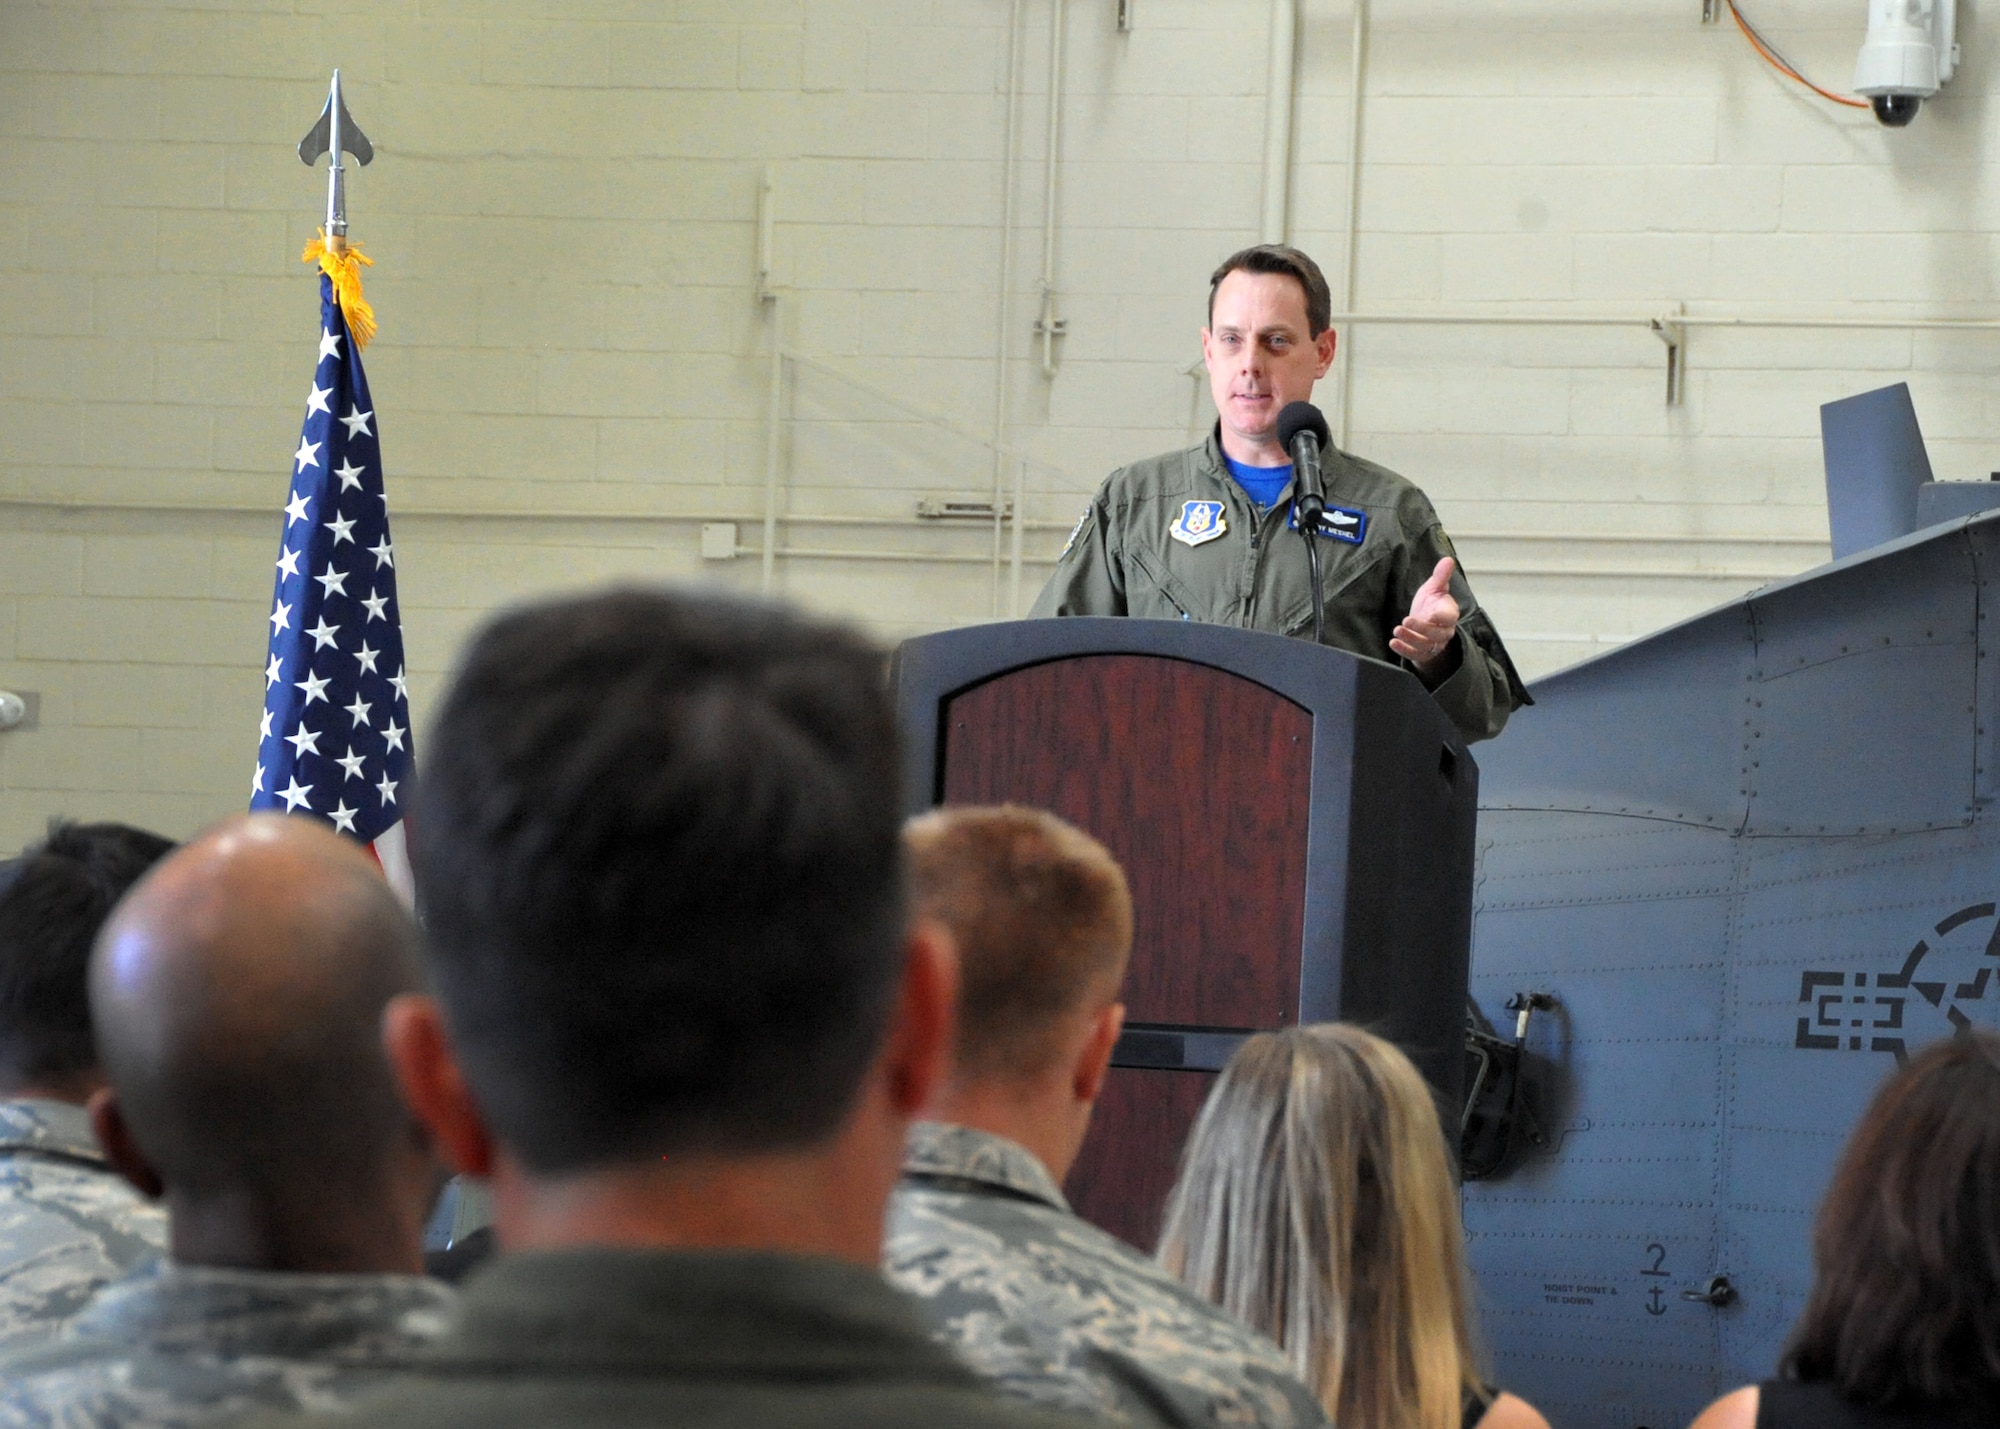 U.S. Air Force Reserve Lt. Col. Andrew Meshel, a Tucson attorney and prior Navy man, addresses the 305th Rescue Squadron in a ceremony April 3 at the 943rd Maintenance Squadron hangar. (U.S. Air Force photo/Tech. Sgt. Carolyn Herrick)